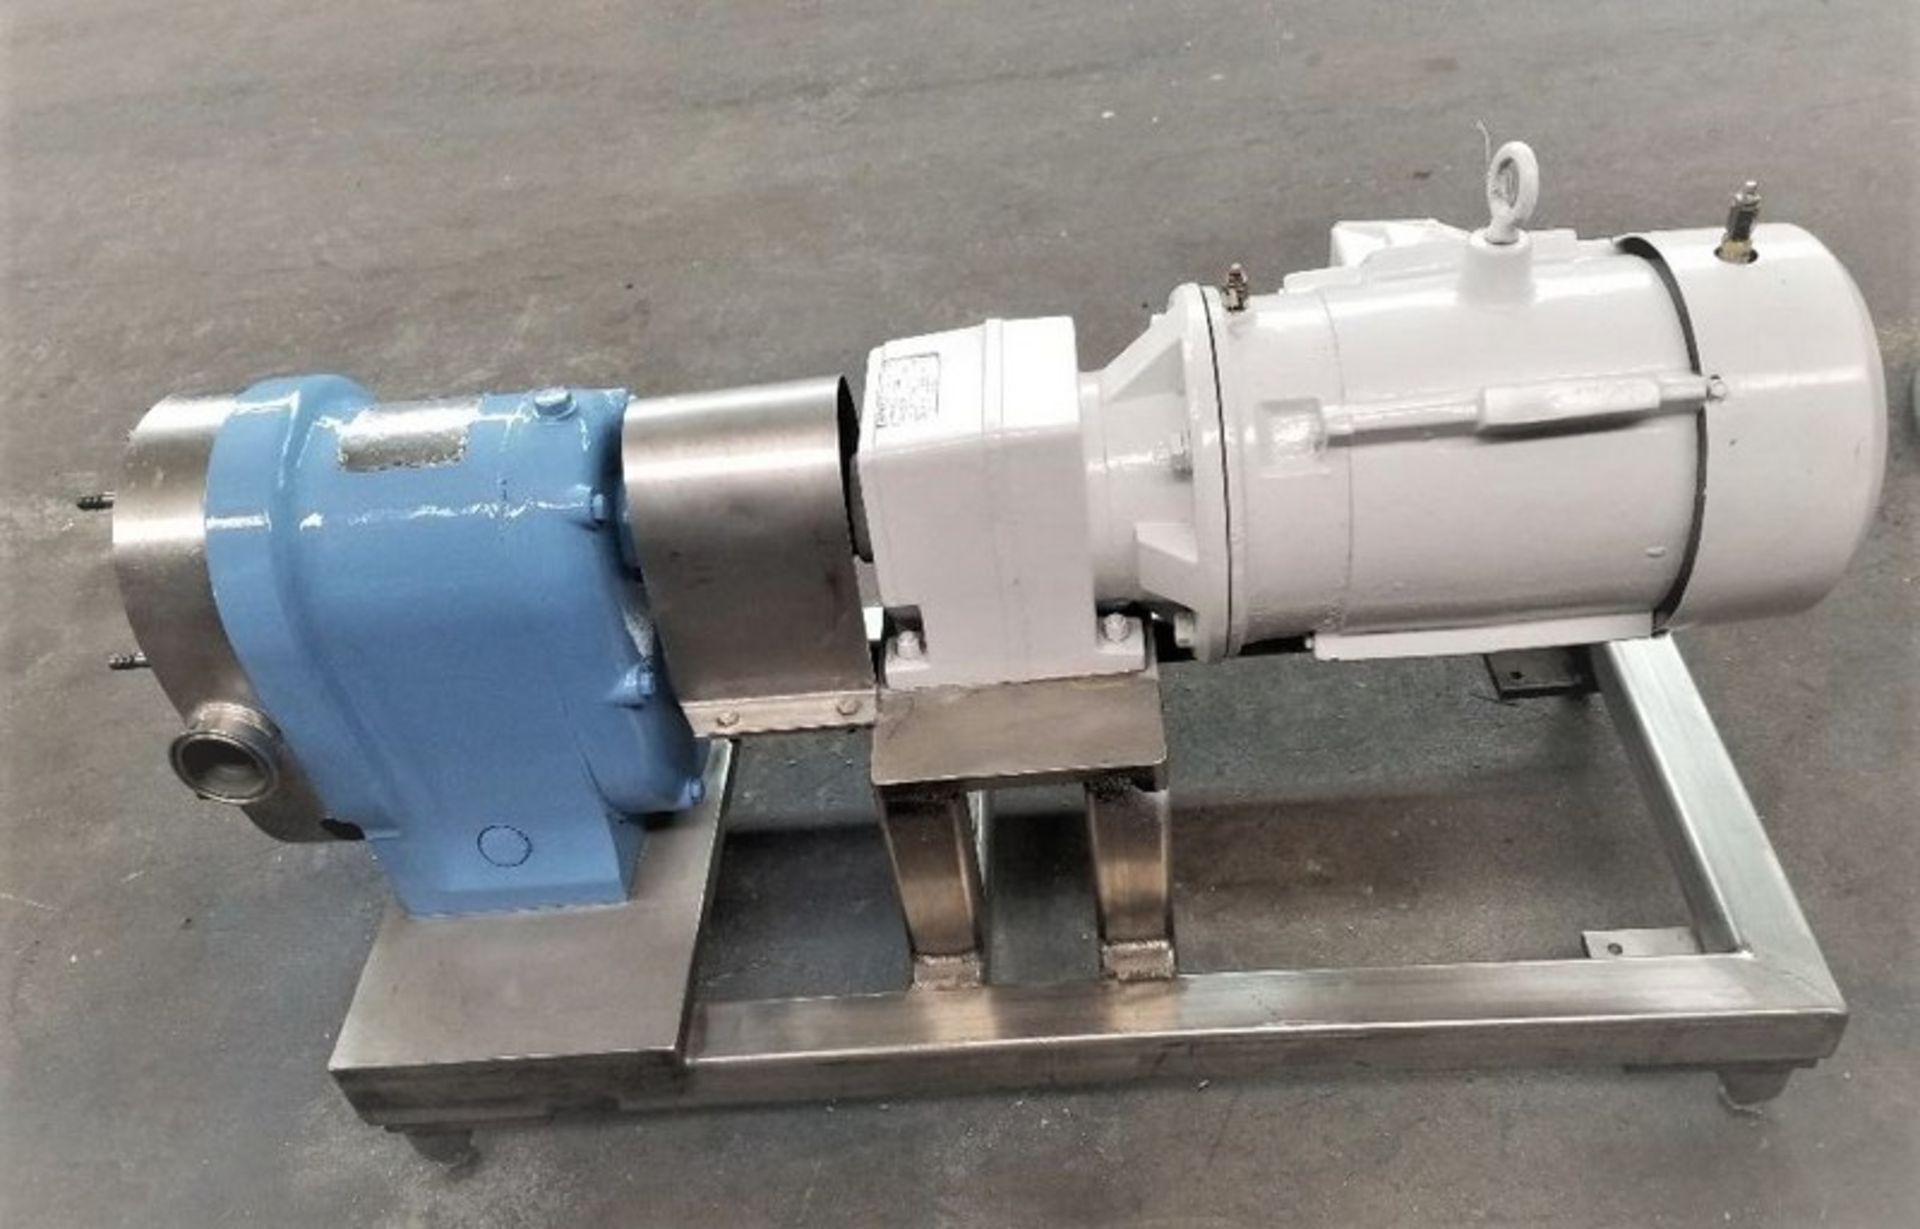 Waukesha 5 hp S/S Positive Displacement Pump with 2-1/2" Tri-Clamp Inlet and Outlet, 230/460 V - Image 3 of 9